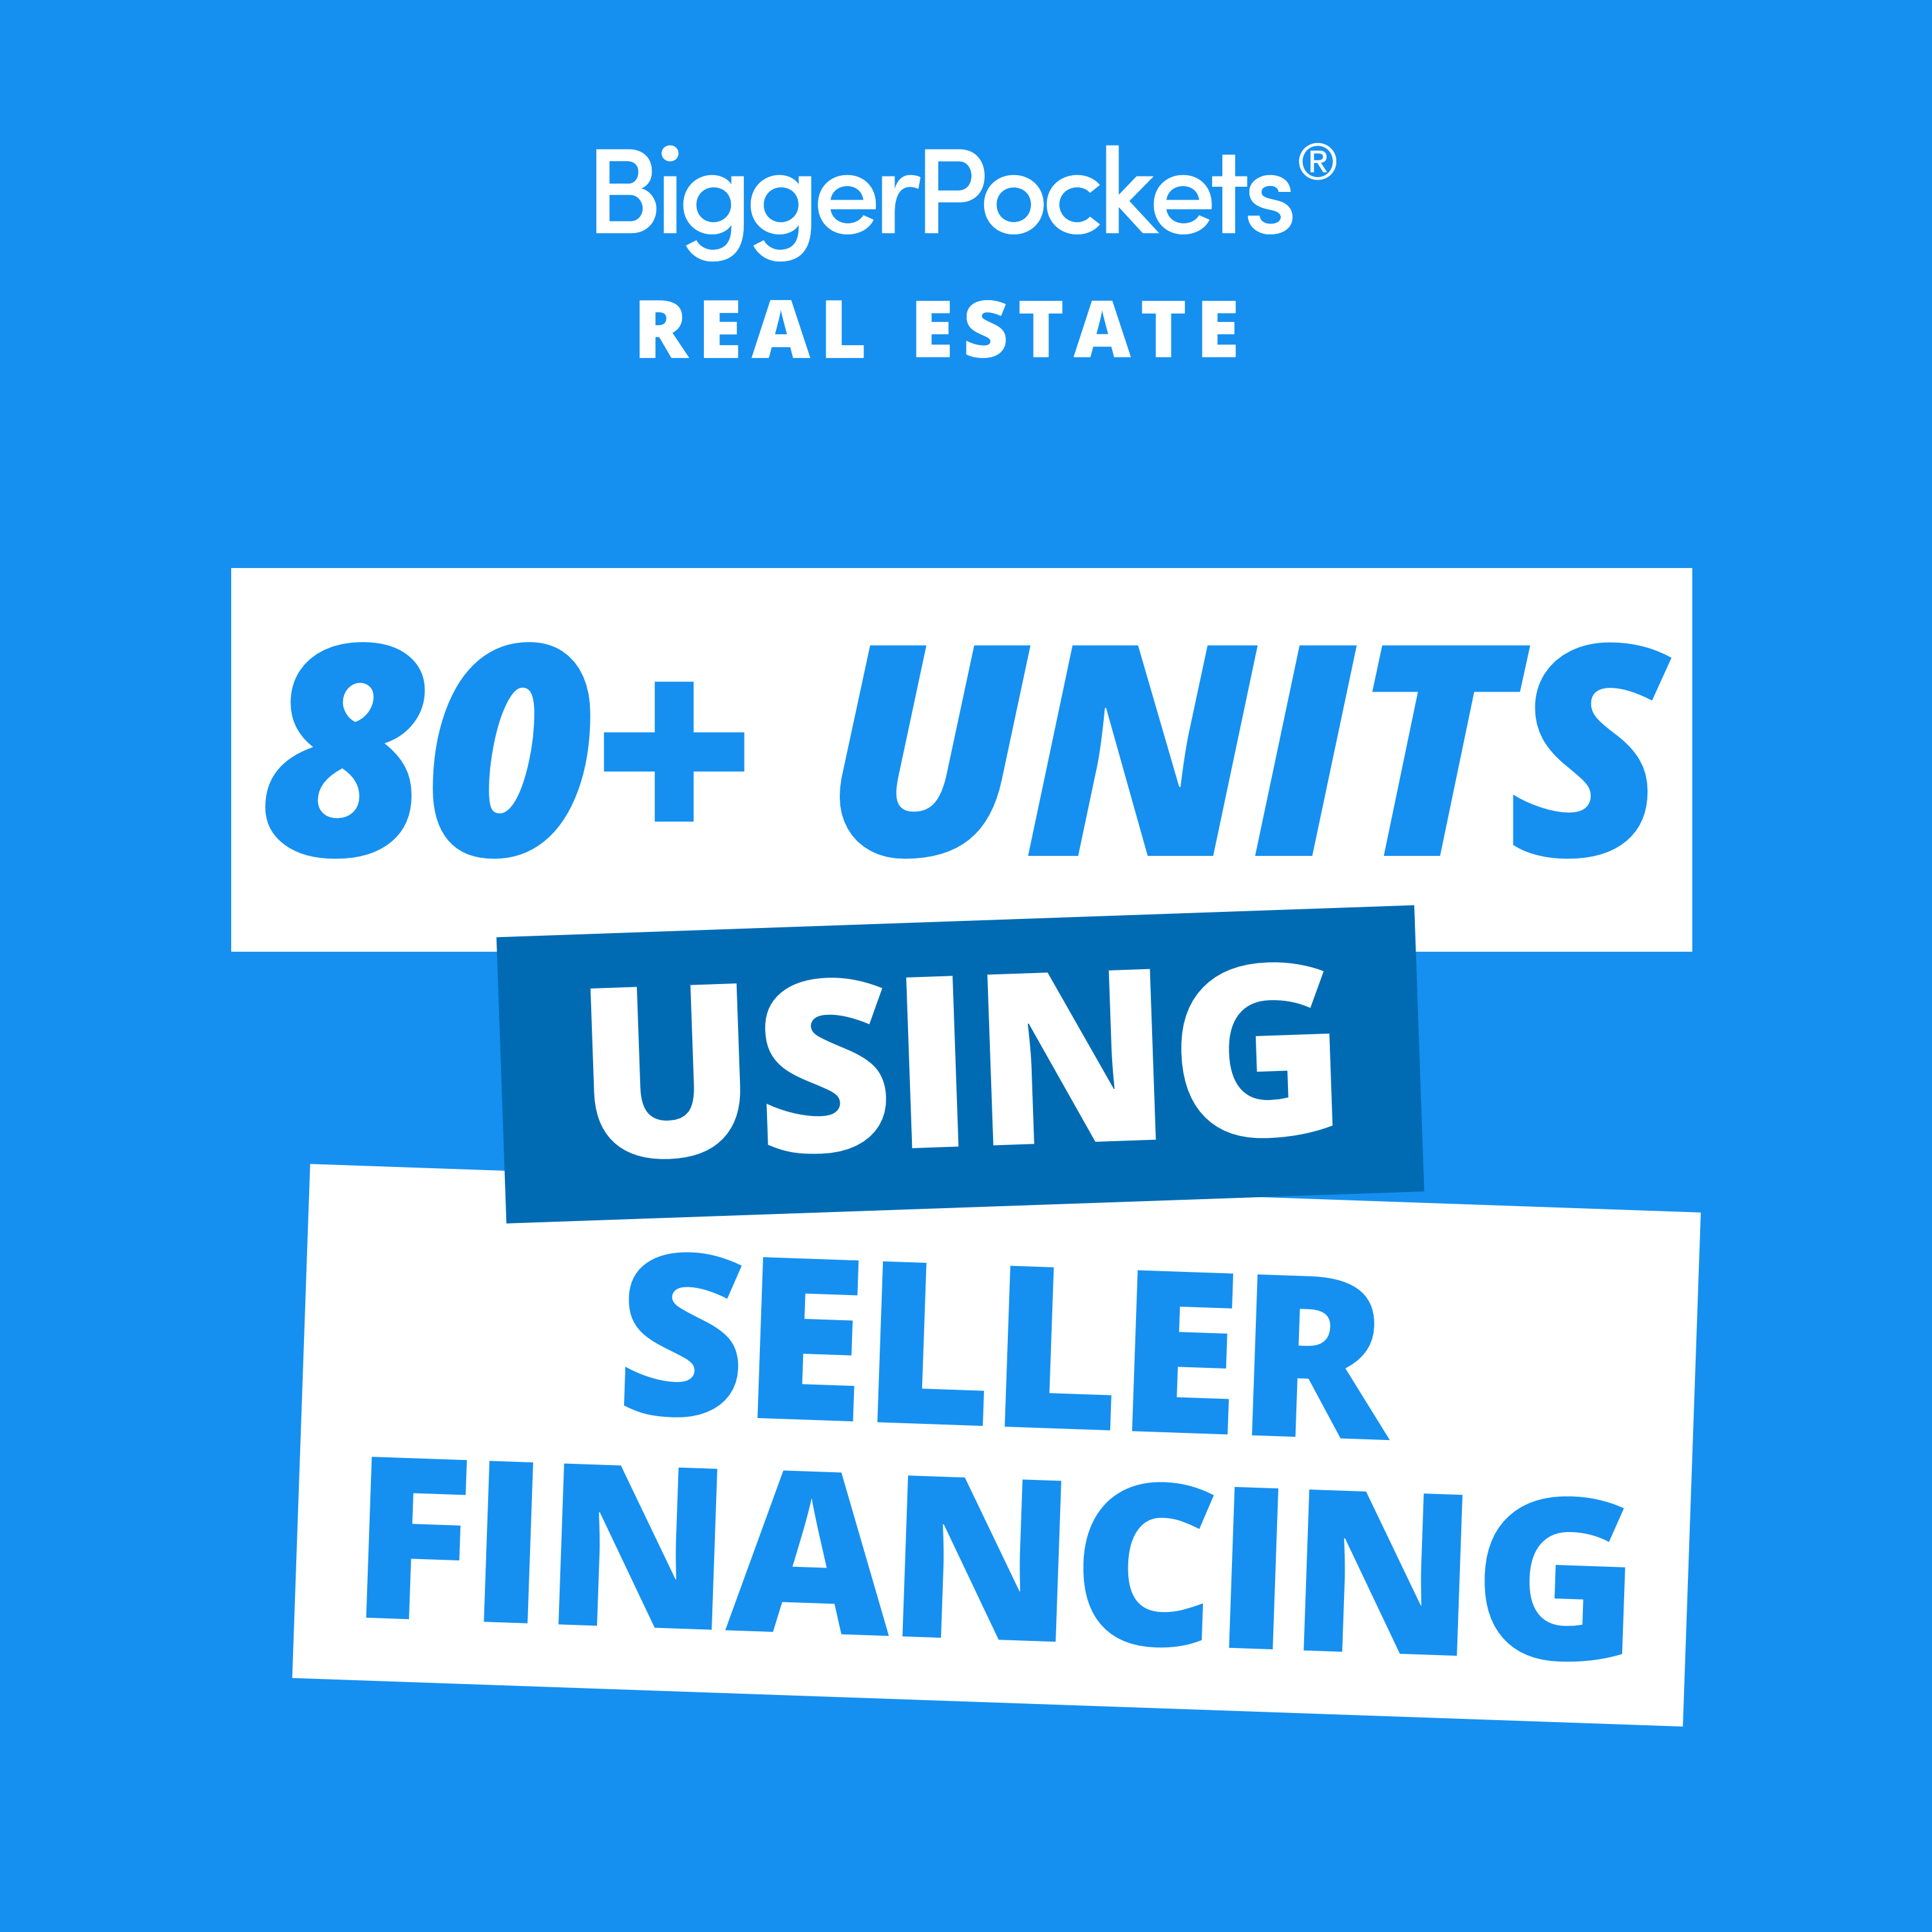 548: How to NOT Get Scammed on Your Next “Real Estate Opportunity” w/Mike Nuss & Tyler Combs